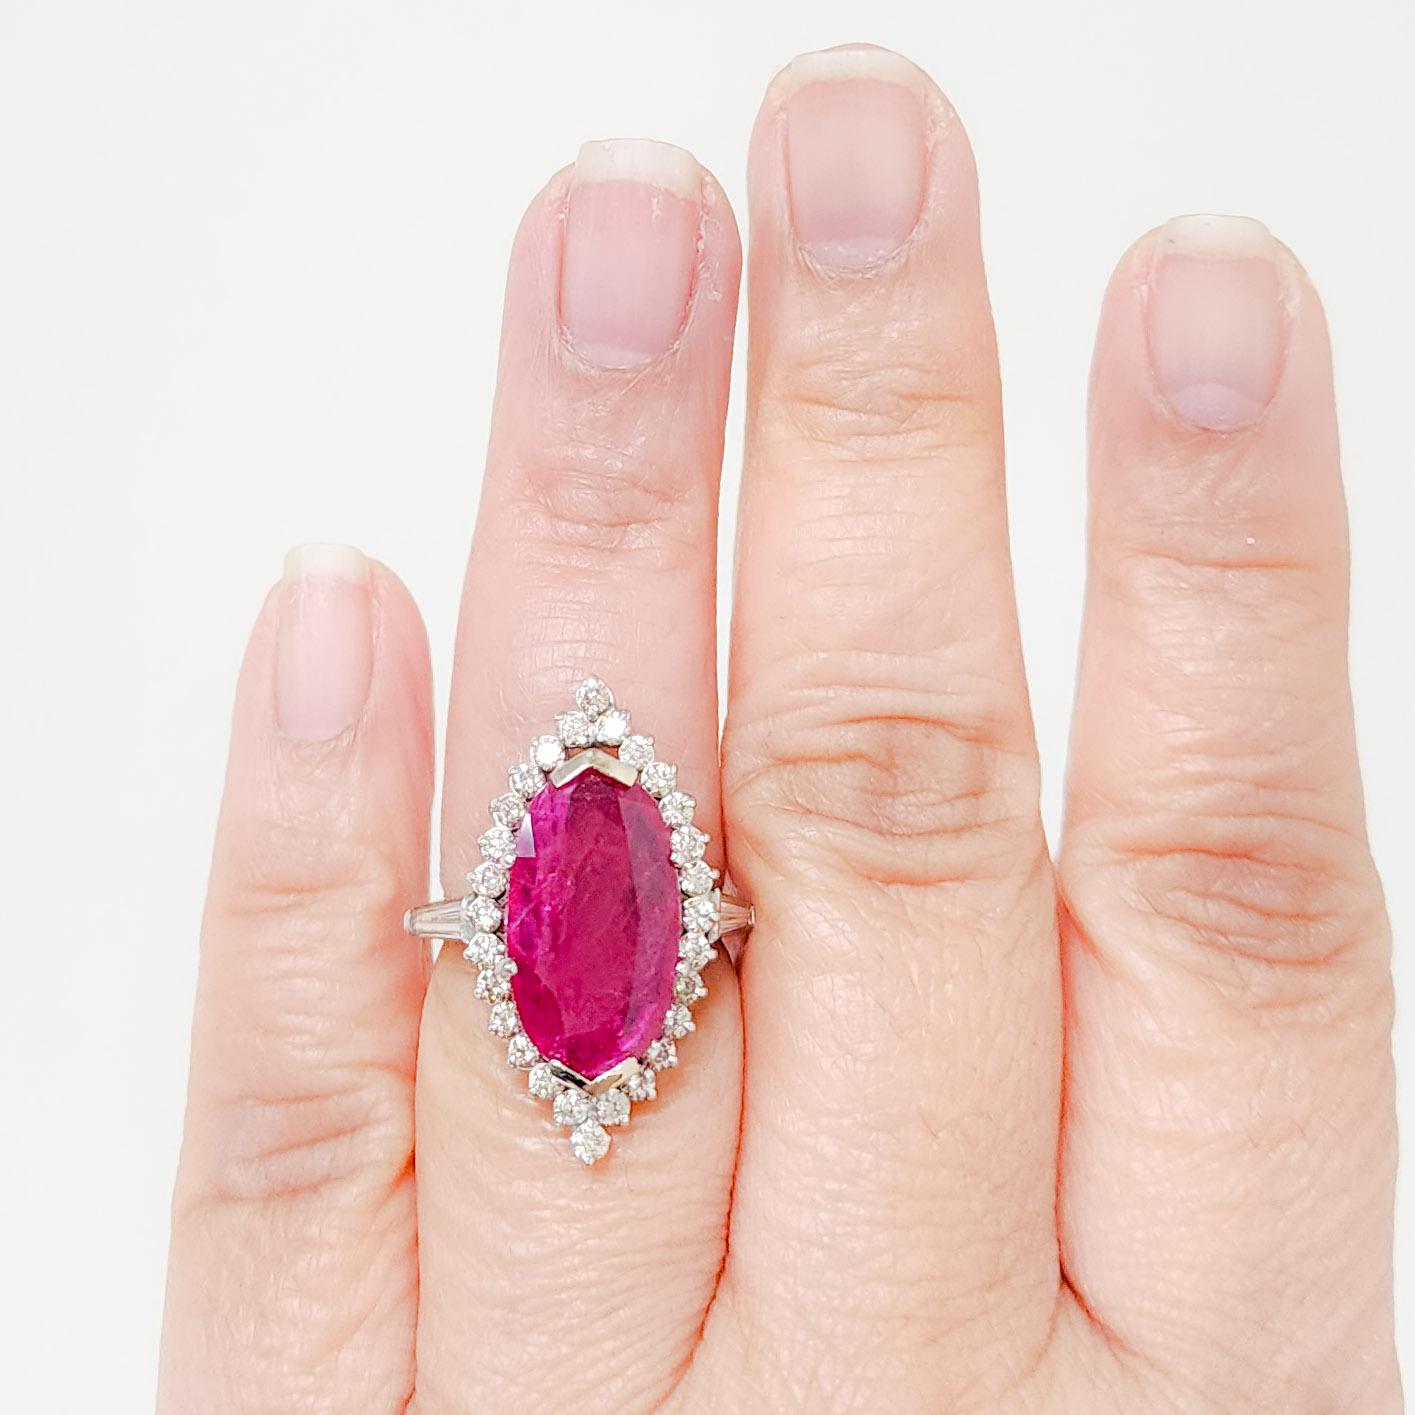 Gorgeous 5.84 carat Mozambique red ruby oval with white diamond rounds and baguettes in size 6.5.  This ring is a perfect accessory for any occasion and comes with a GRS Lab Report.  